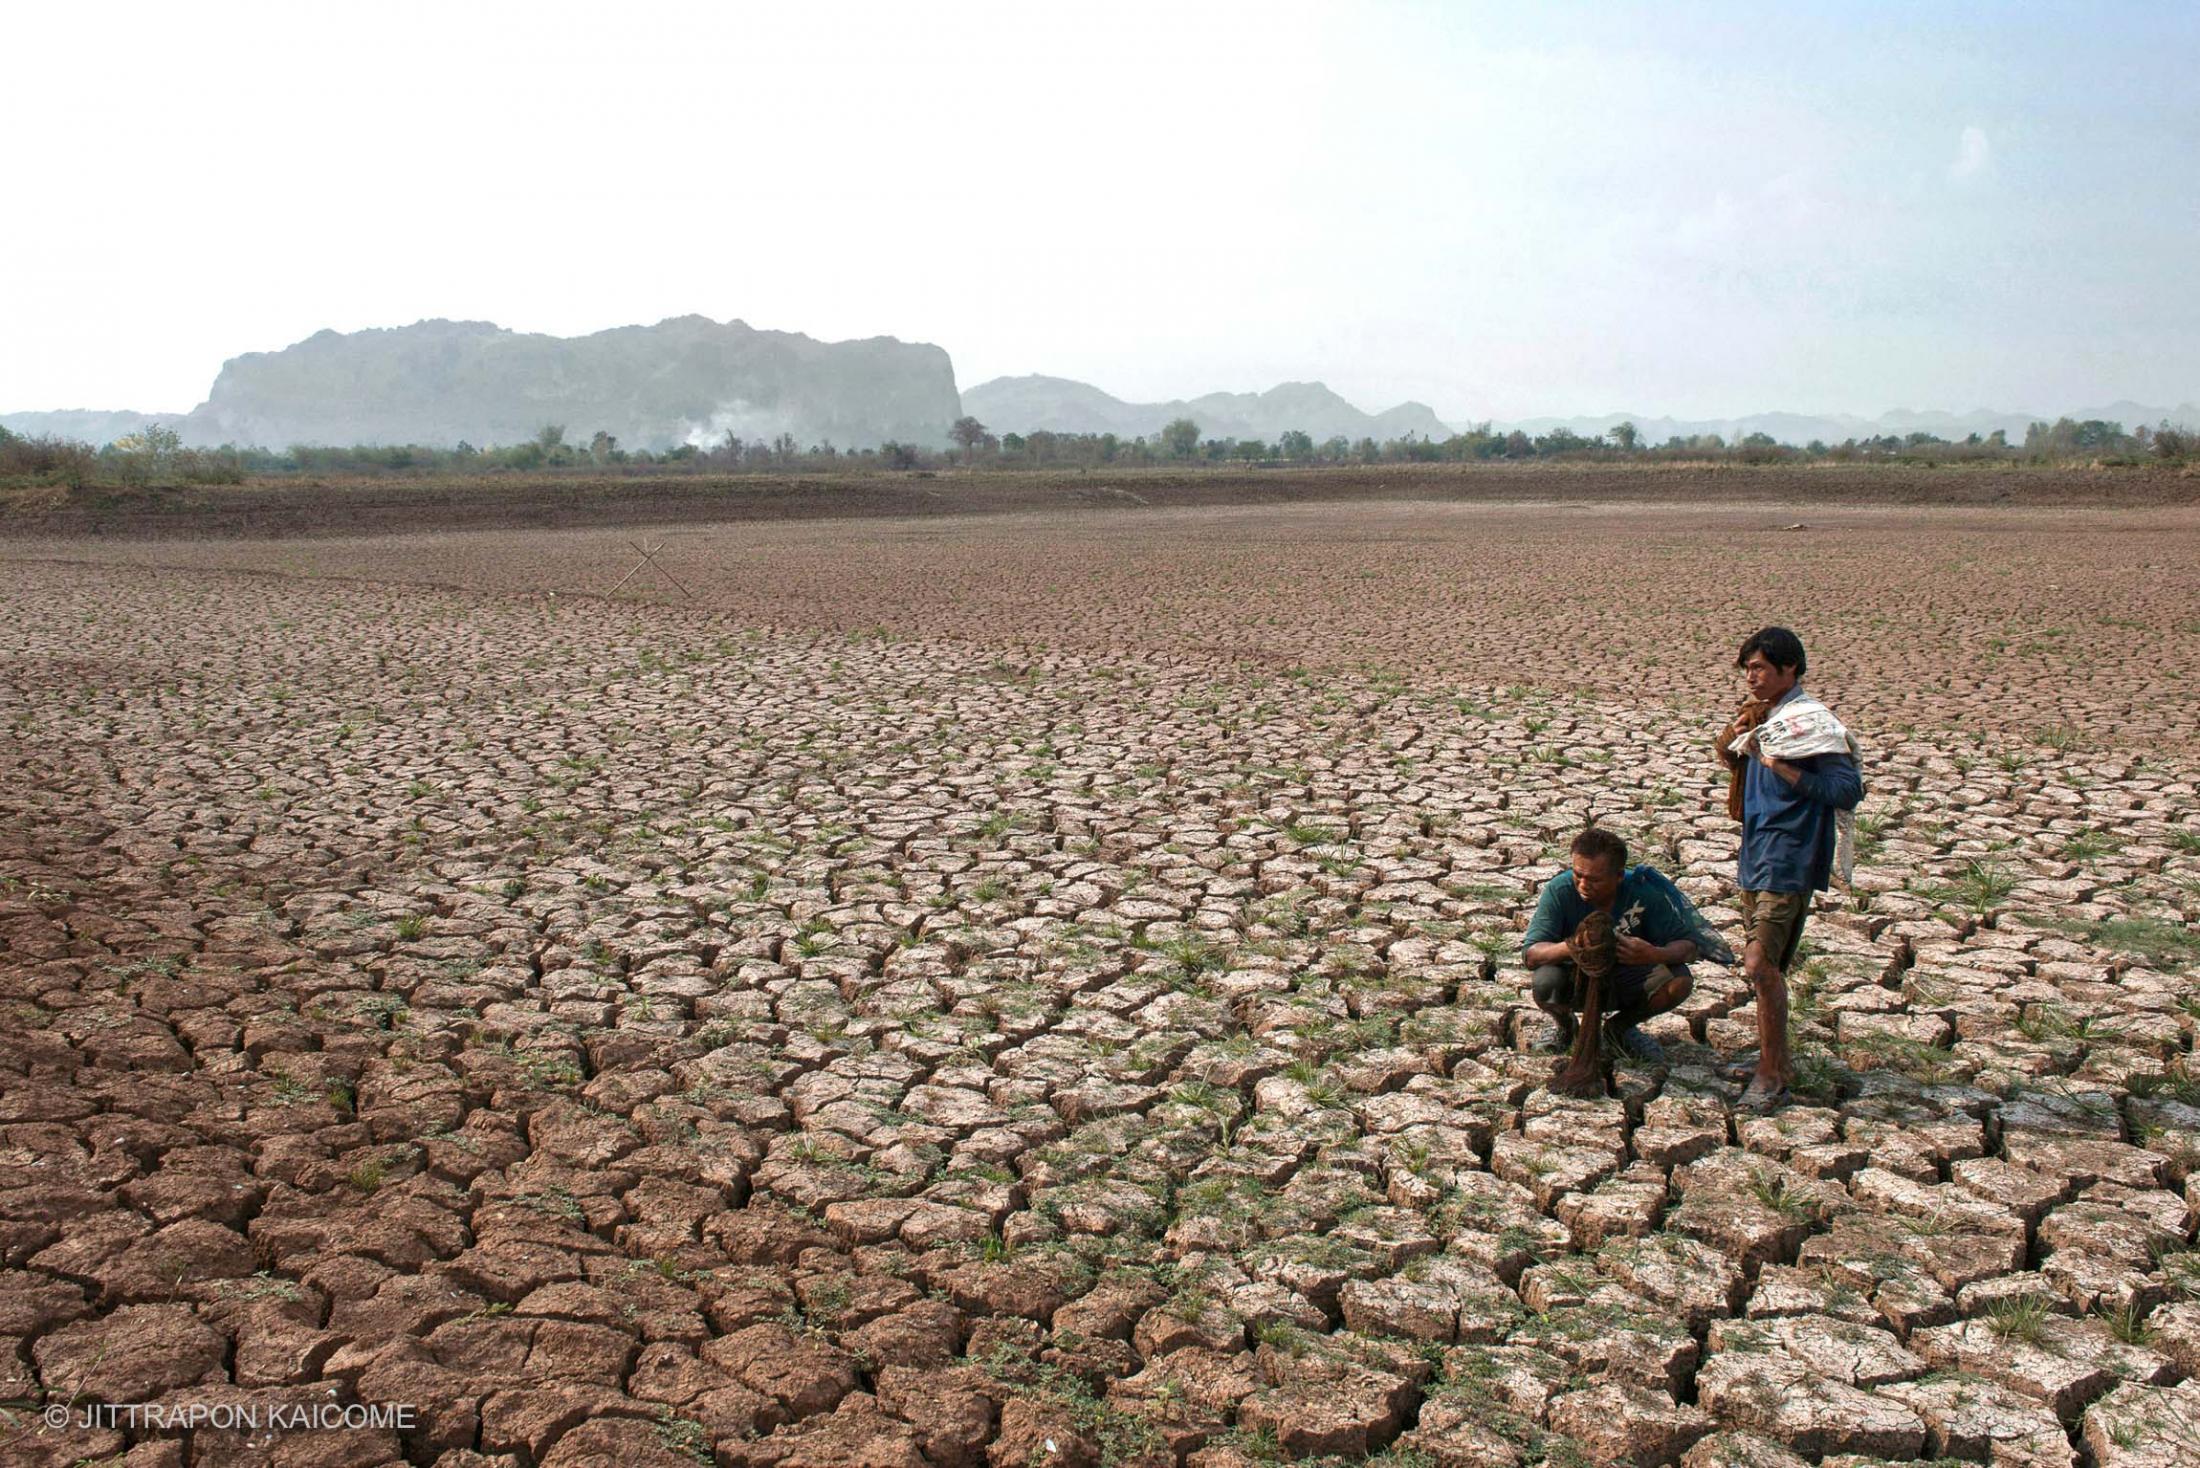 Thailand faced the heaviest drought in decades with an extended dry season and temperatures...